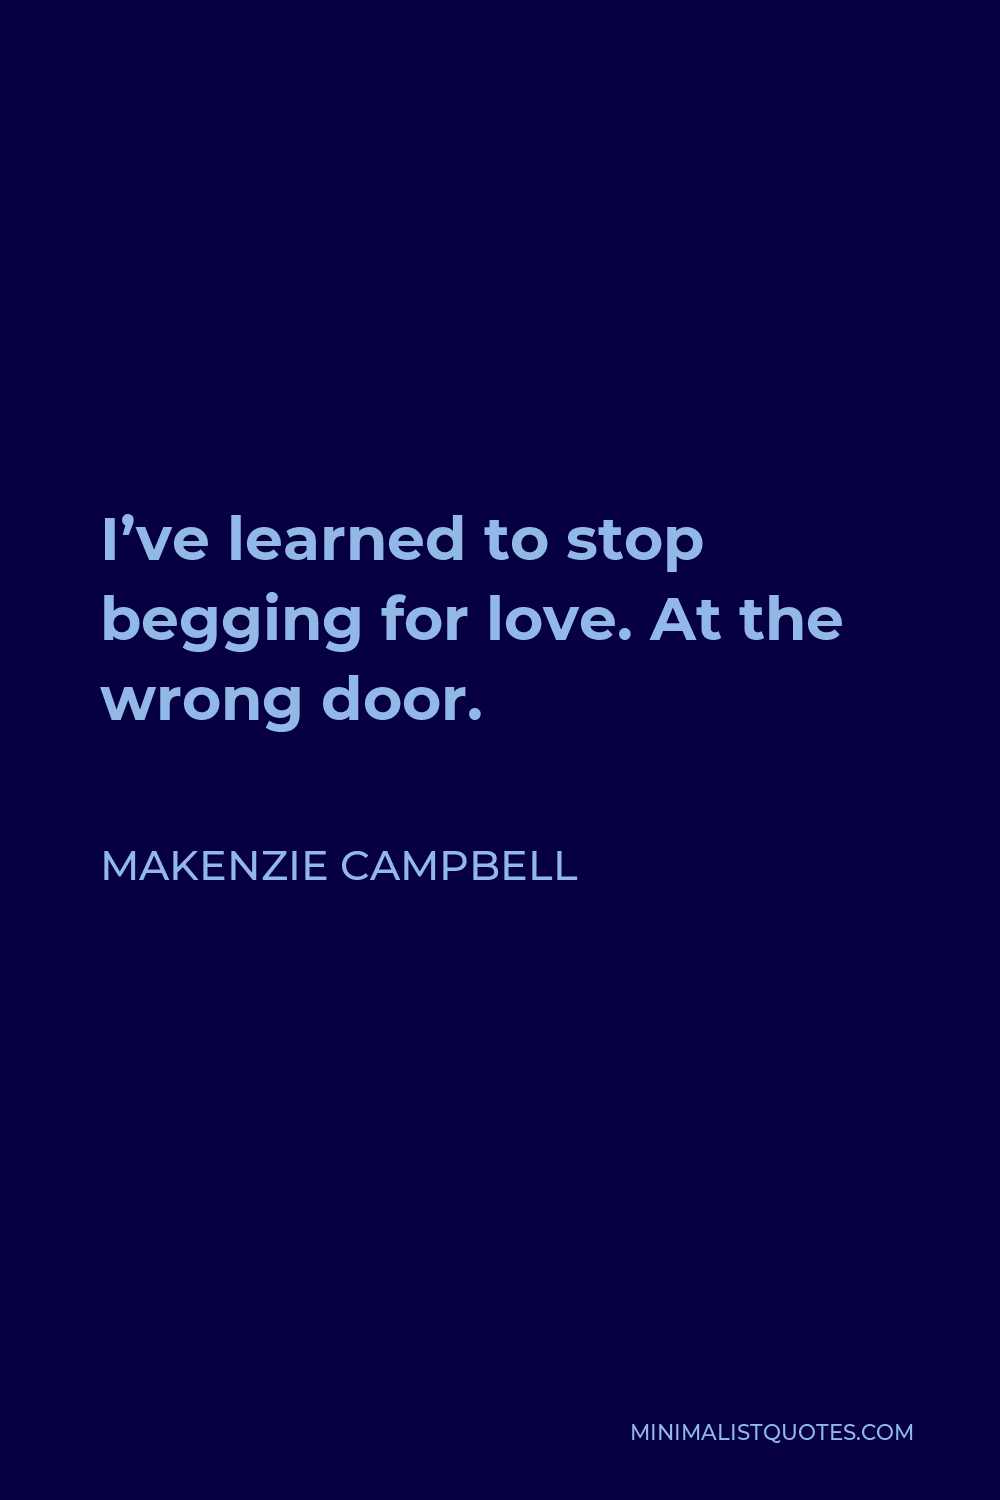 Makenzie Campbell Quote - I’ve learned to stop begging for love. At the wrong door.